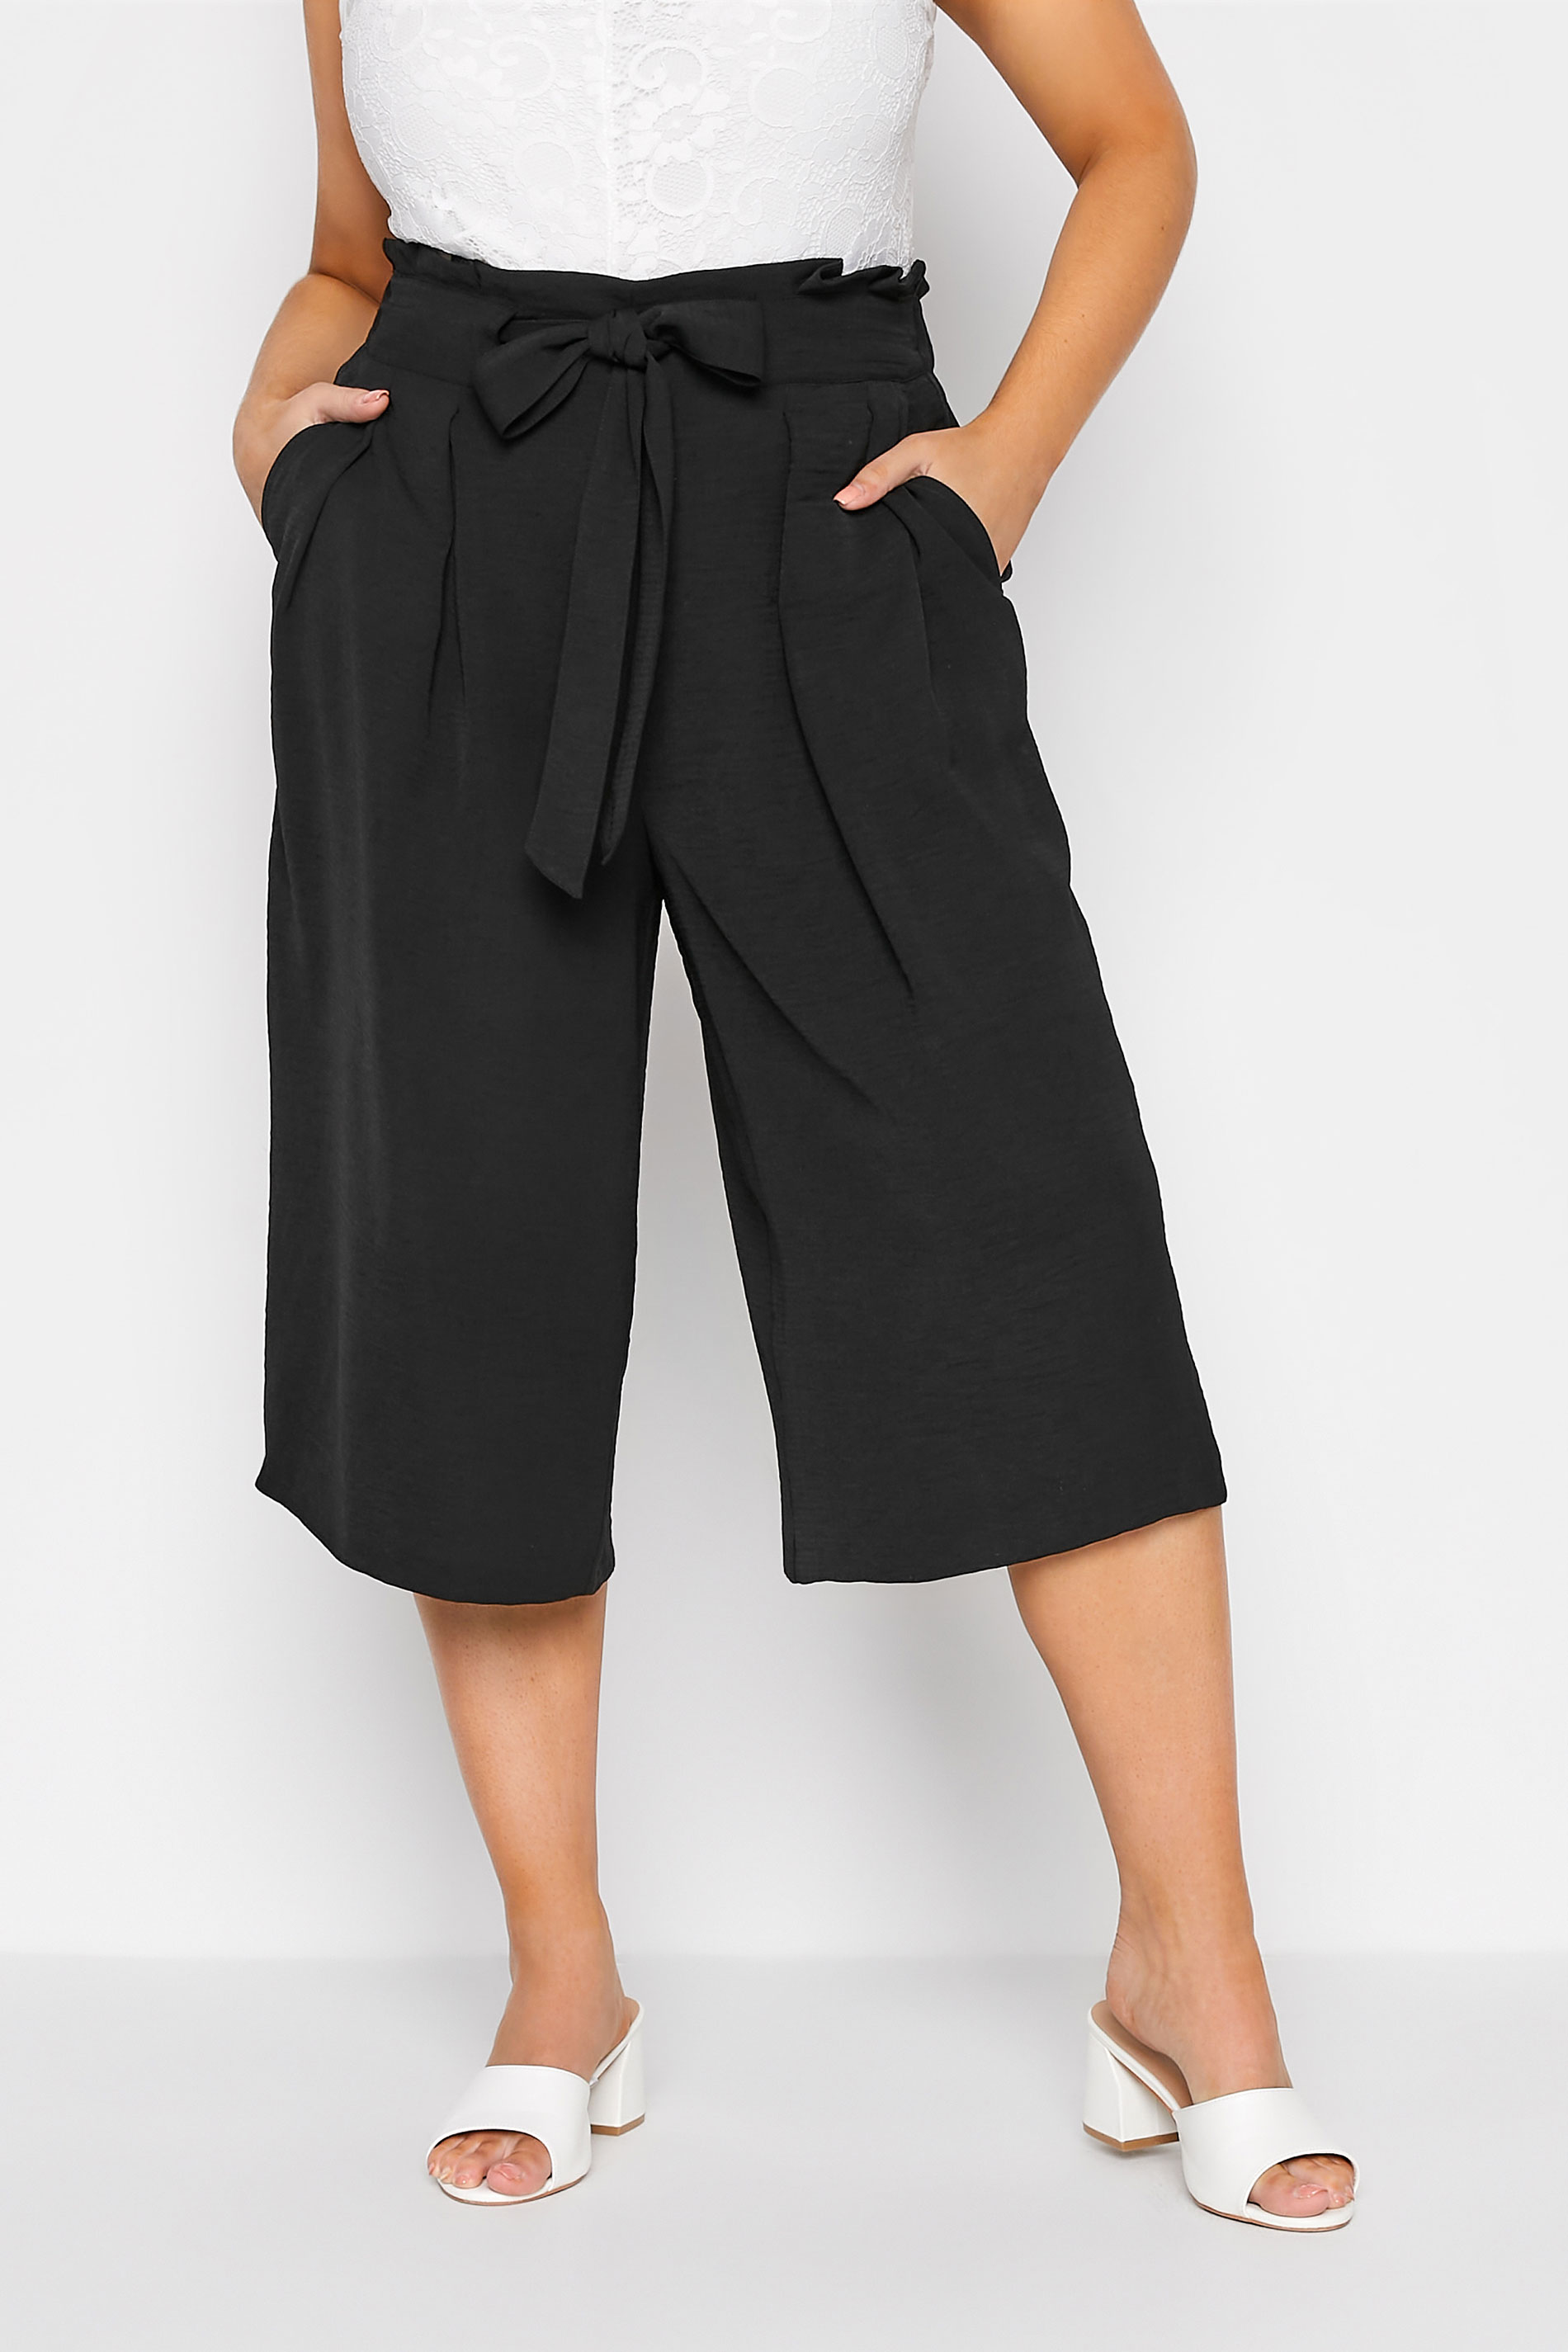 Plus Size Black Paperbag Twill Culottes | Yours Clothing  1